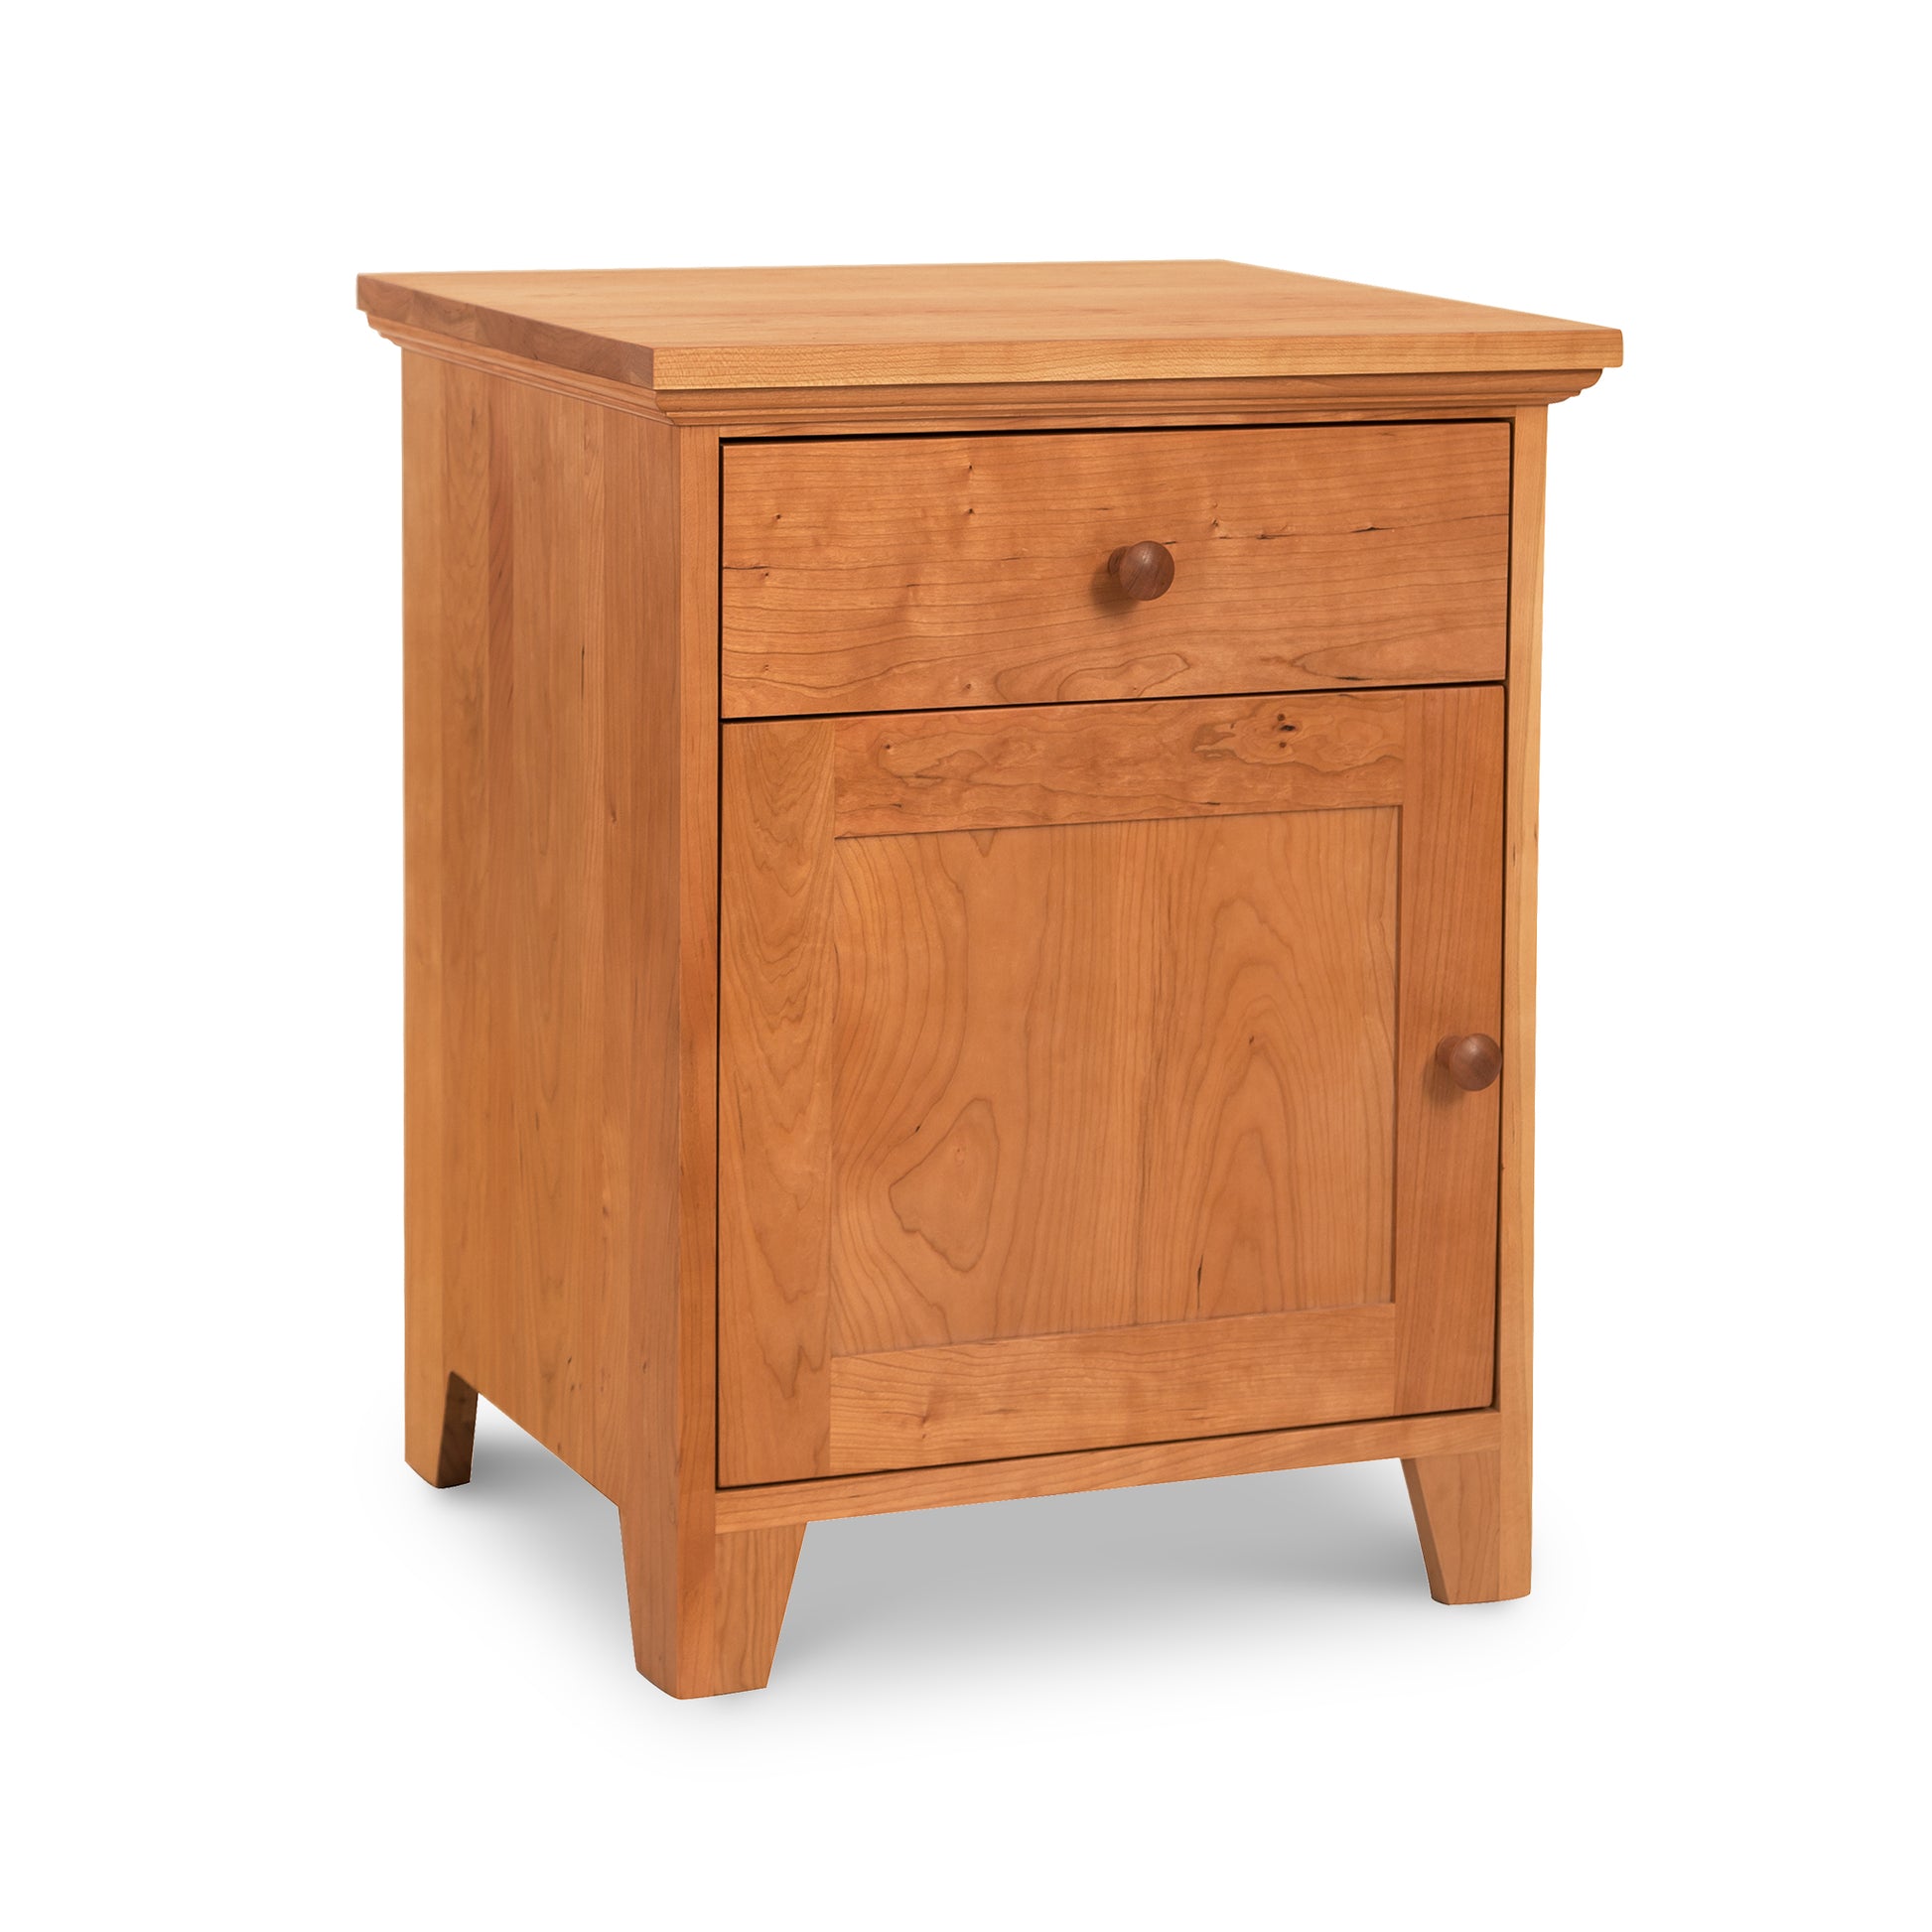 A solid wooden Lyndon Furniture nightstand with a drawer, perfect for an American Country inspired bedroom.